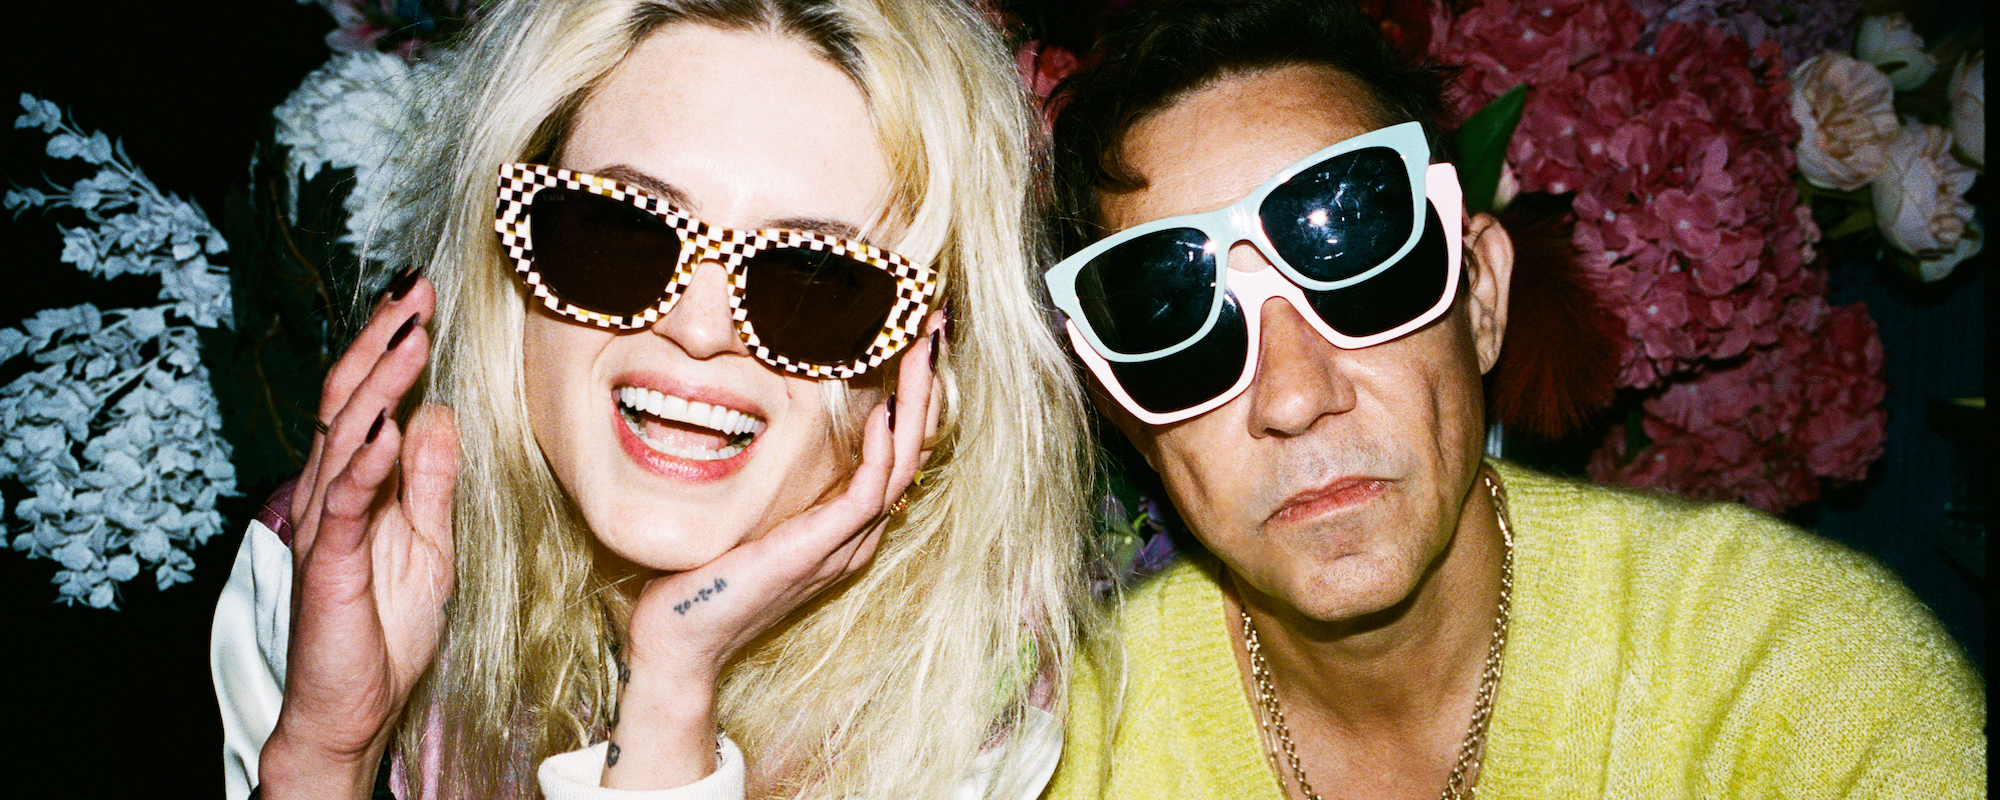 The Kills Return with Cross-Country Singles “New York” and “LA Hex”